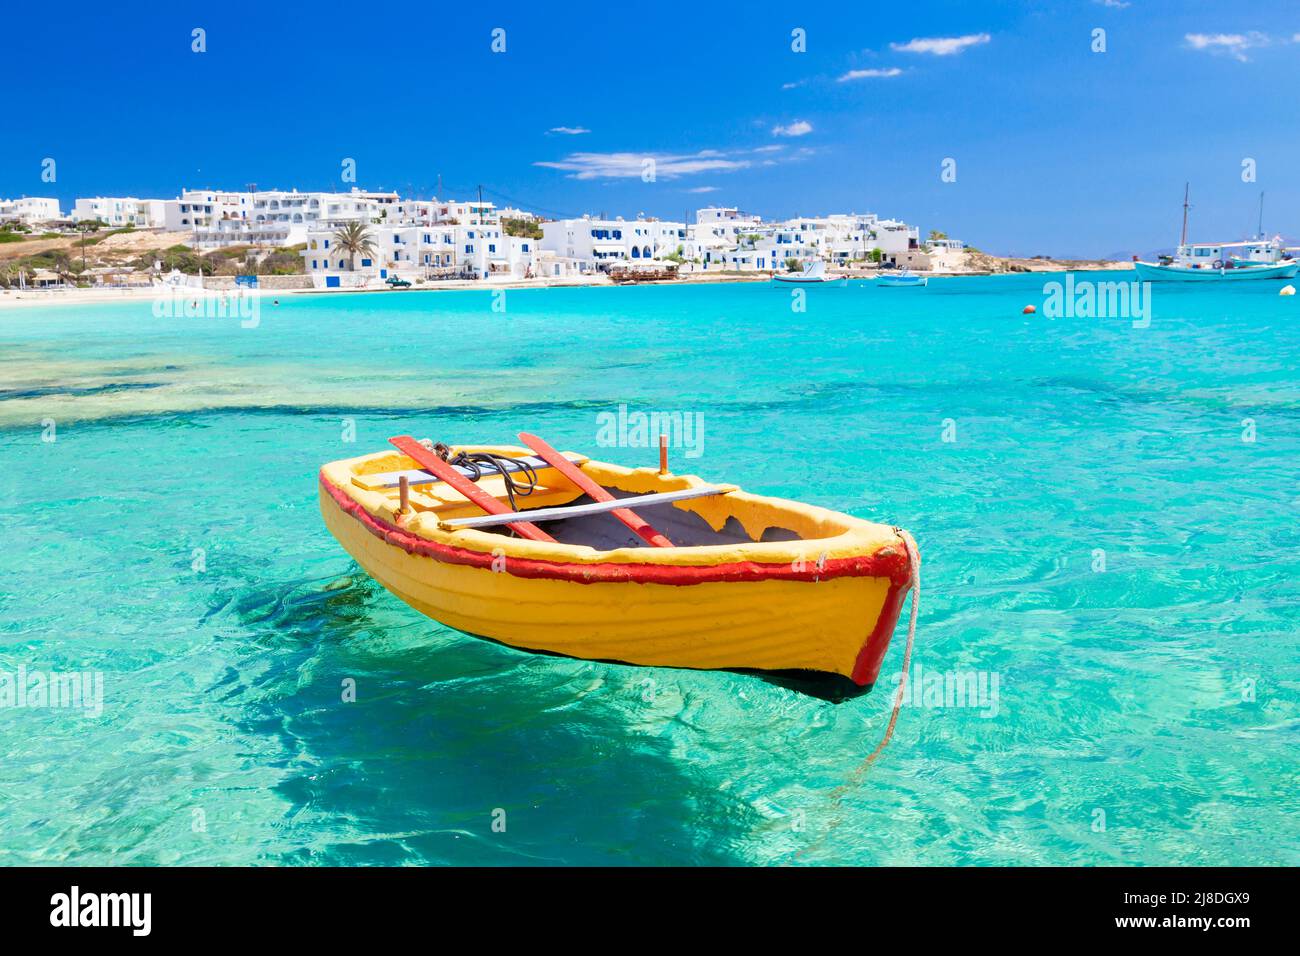 At the fishing port of Koufonisi island, a beautiful little island in Cyclades complex, Aegean Sea, Greece, famous for clear waters and tranquility. Stock Photo